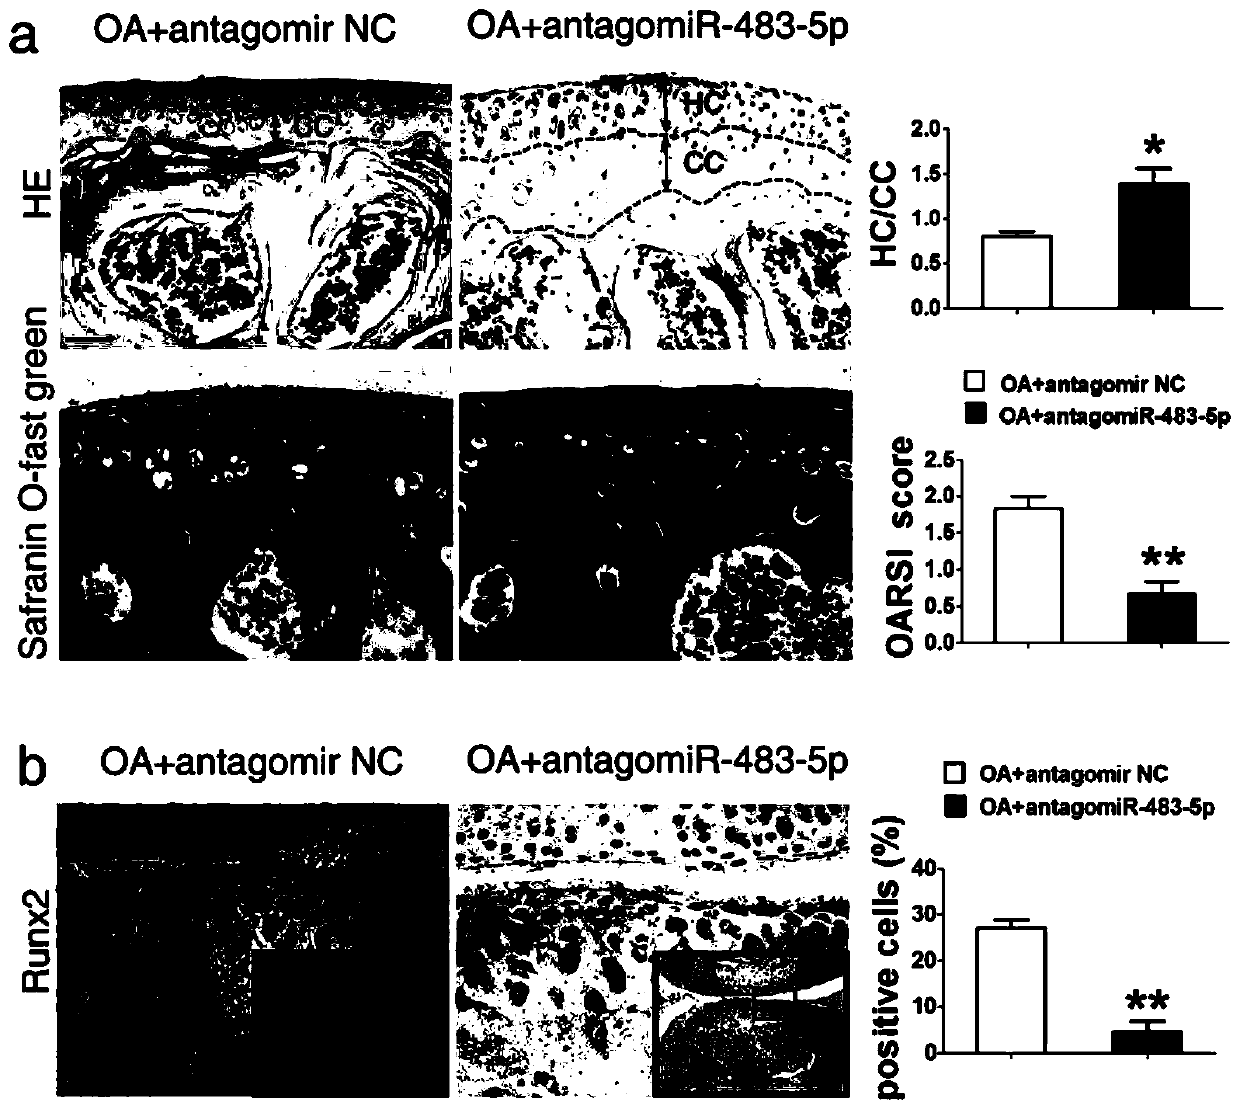 A miRNA-483-5p inhibitor drug and its application in medicine for treating osteoarthritis